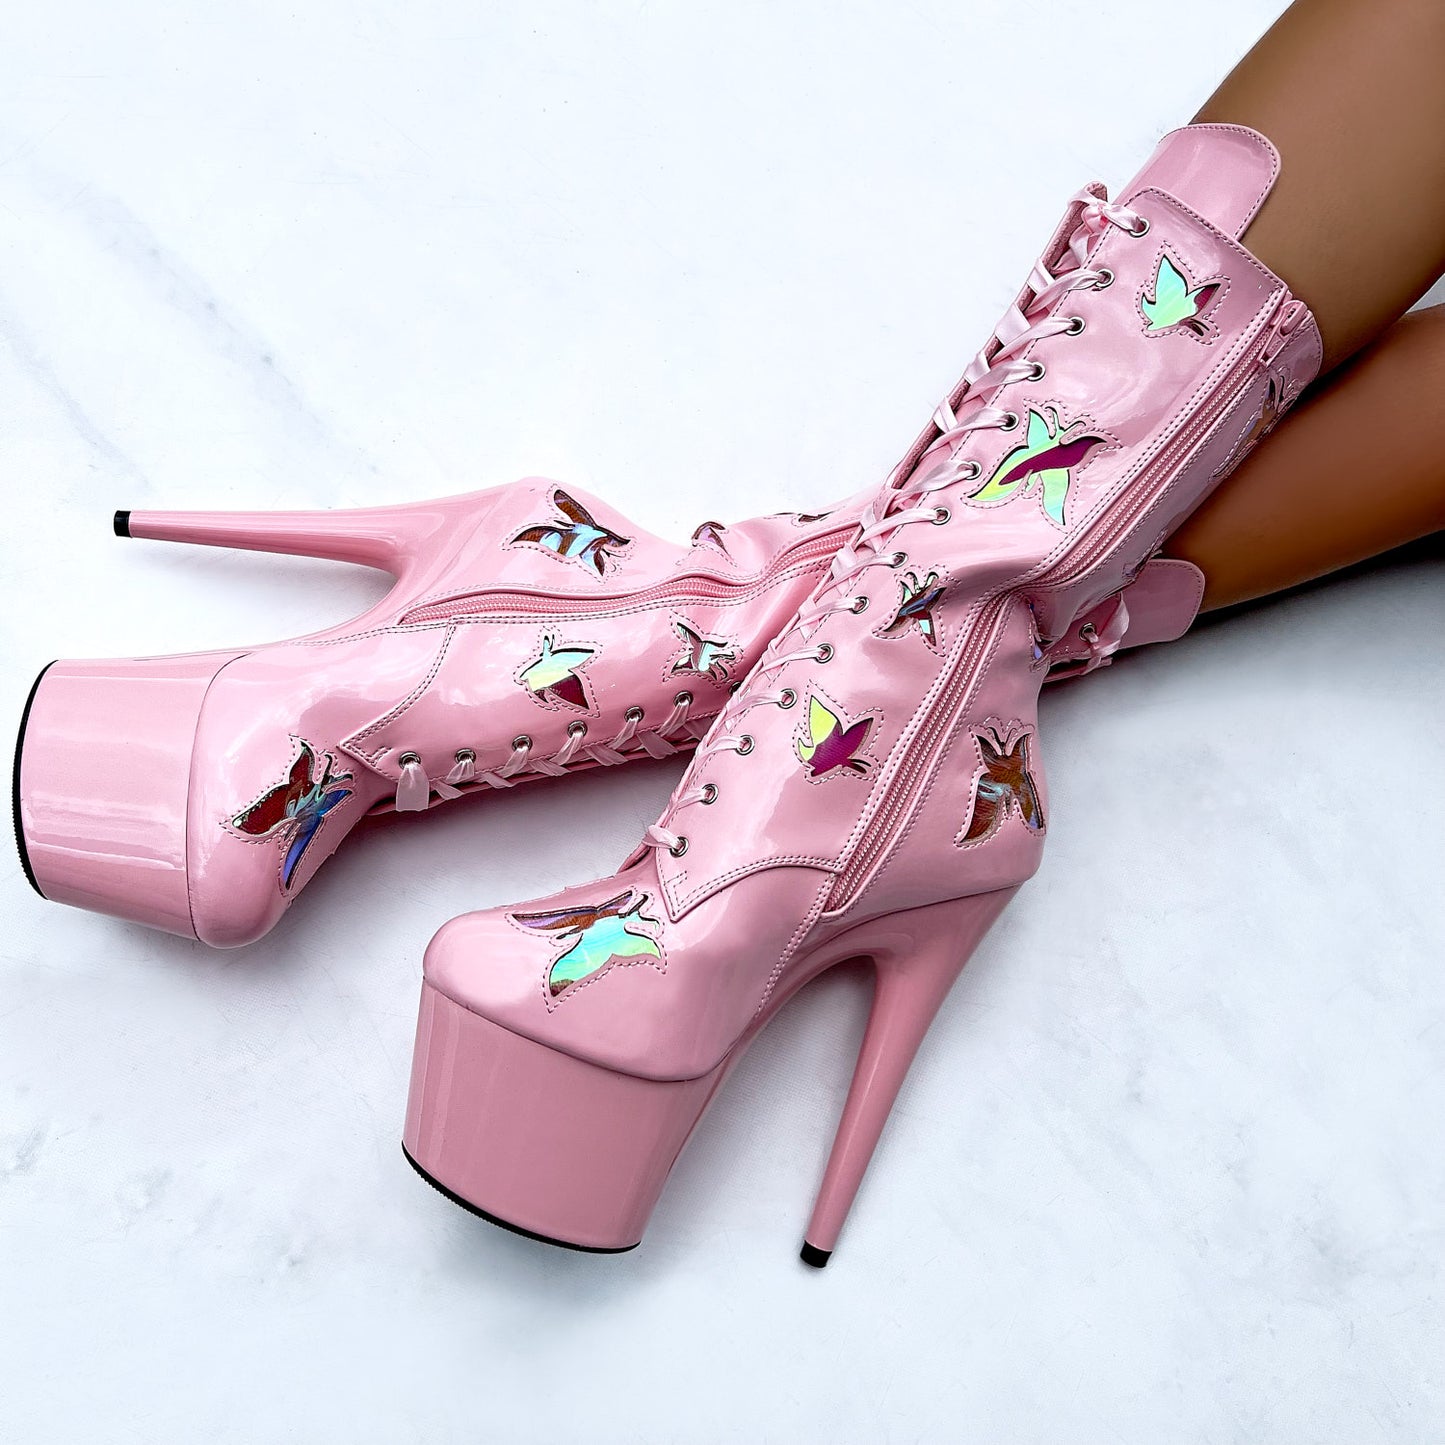 Side view of Butterfly Boot - Pink - 7 INCH